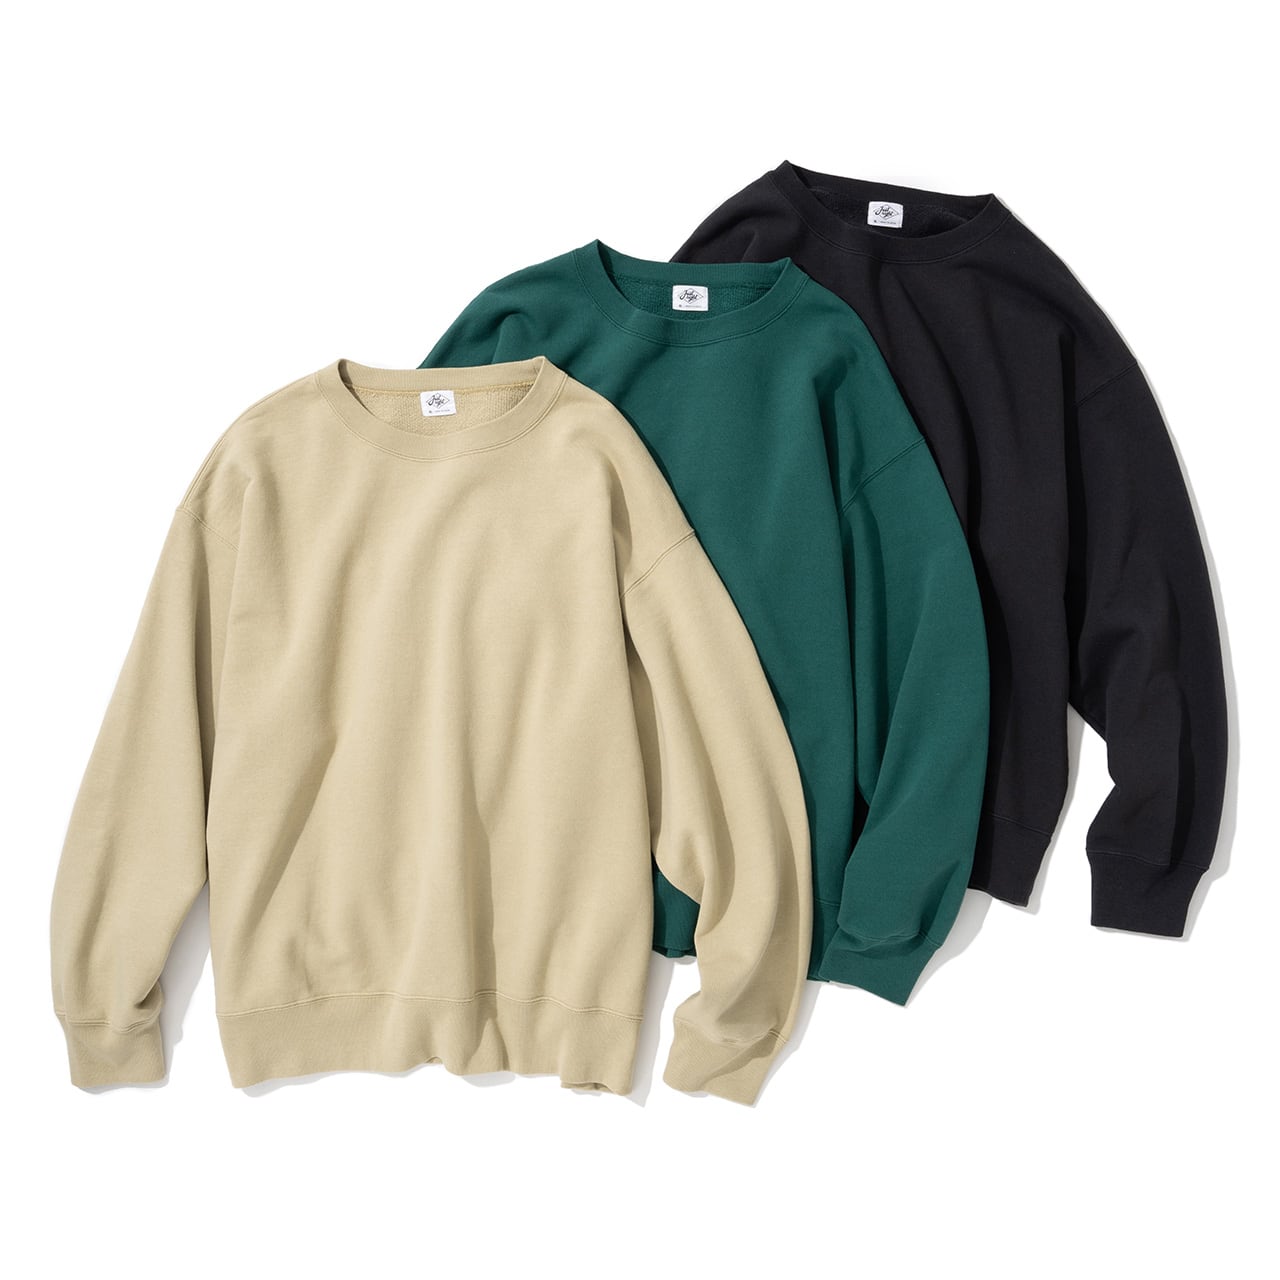 Those Days Crew Neck - New 3 Color & Black Restock | Just Right